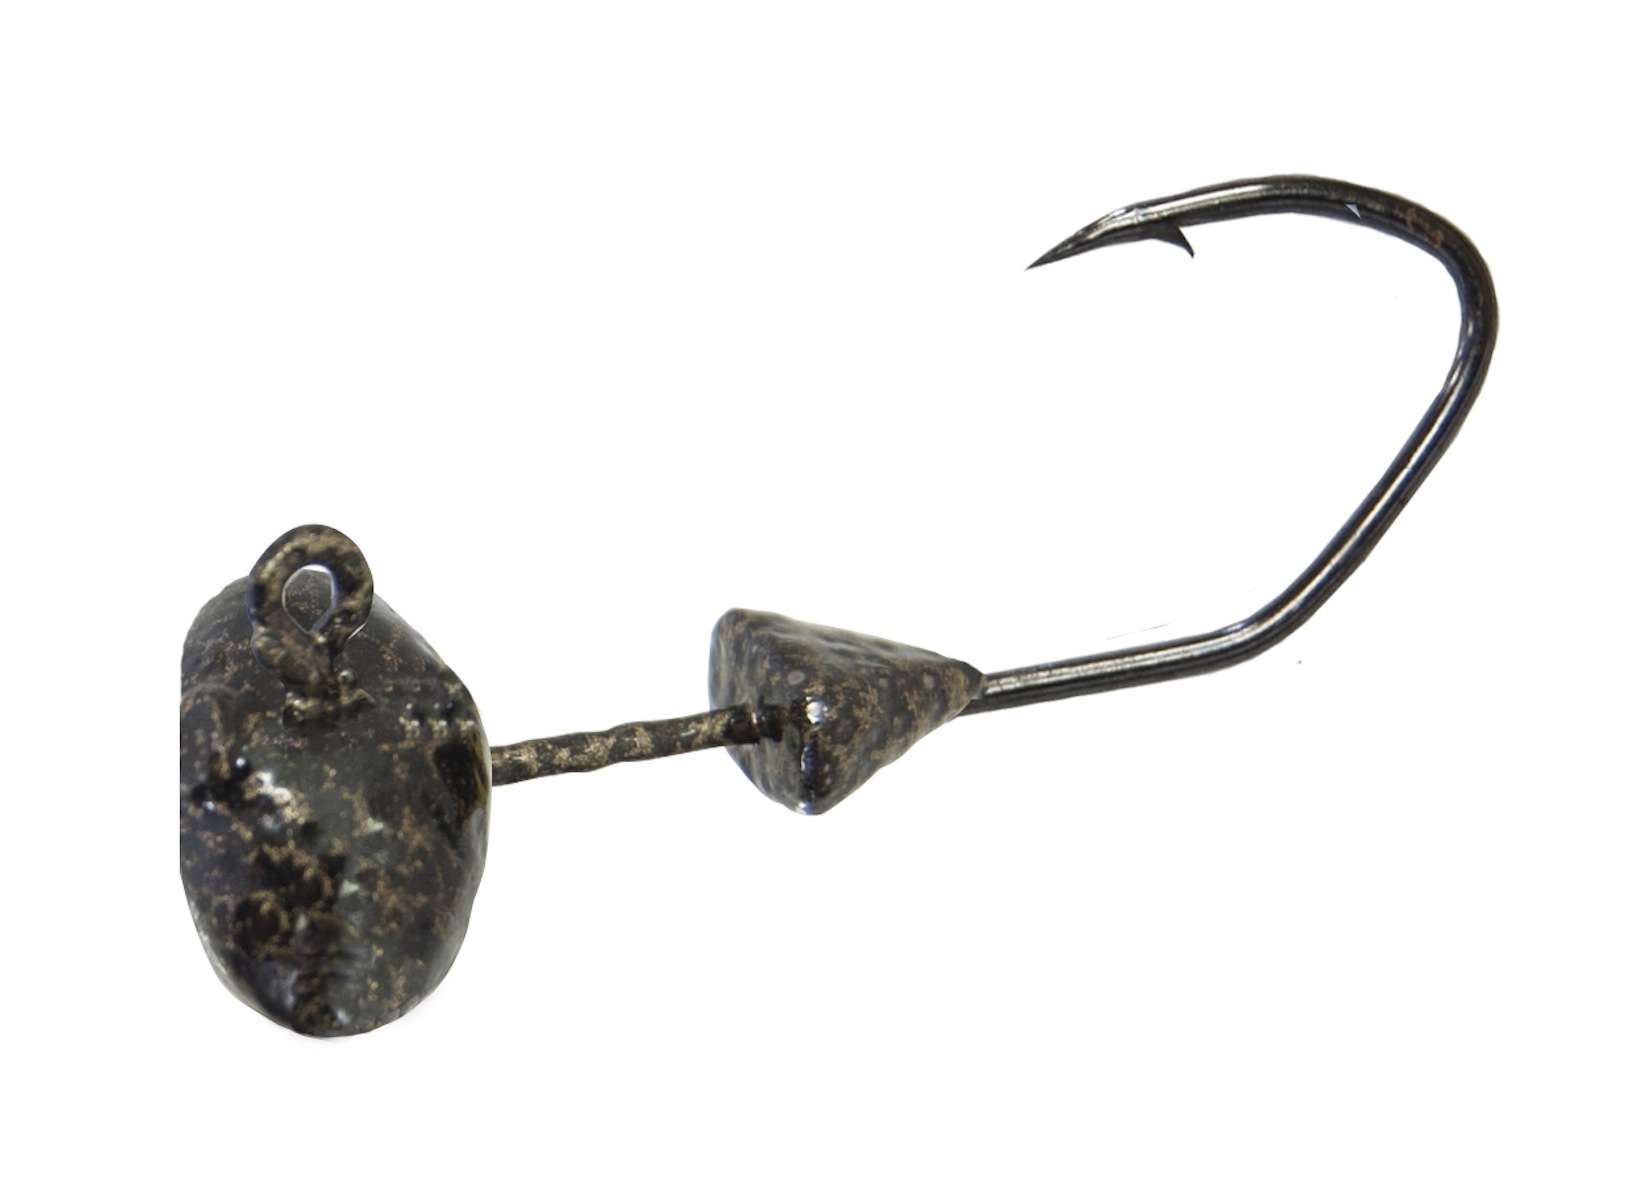 Ned Rig Pighead<br>	
Gene Larew	<br>
$5.99	<br>
The Larew Pighead is a flat-faced, football-shaped âweedlessâ jighead that brings a larger hook, the best-ever bait-holder design for plastics, and a quality cable guard to Ned Rigs and other finesse-fishing applications. The hook is a Mustad 1/0 black nickel Skipjack. Bait keepers are the innovative HoldTight system that keeps plastics snugly in place without Super Glue. The stainless cable guard is the finest of its kind in this jighead category. The Pigheadâs finish is Larewâs popular Copperhead powder coat. Sizes: 1/16-, 1/10- and 1/8-ounce. Four pack. 	